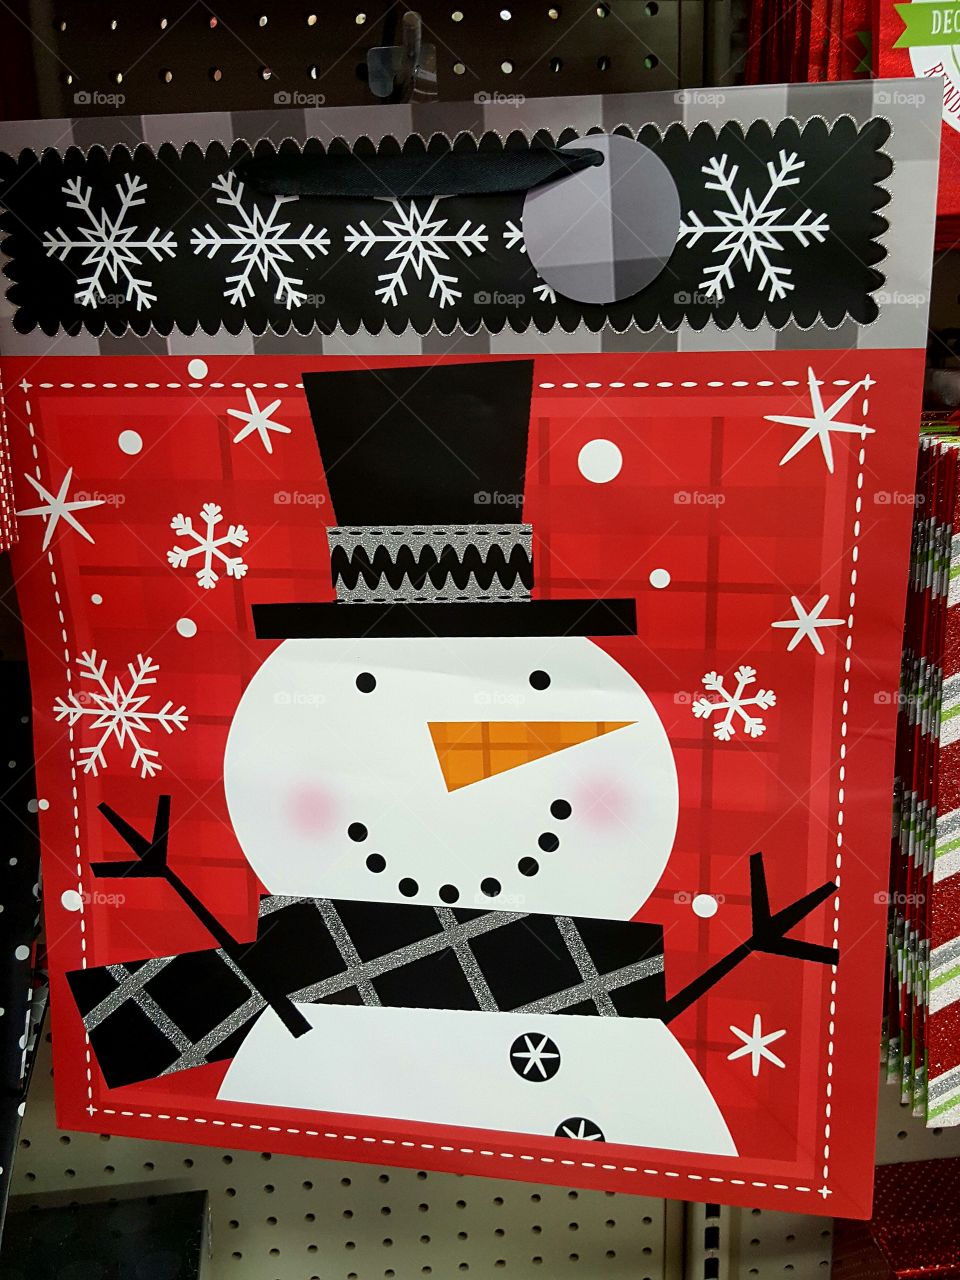 I just love snowmen - even when they're the face on a Christmas gift bag lol.